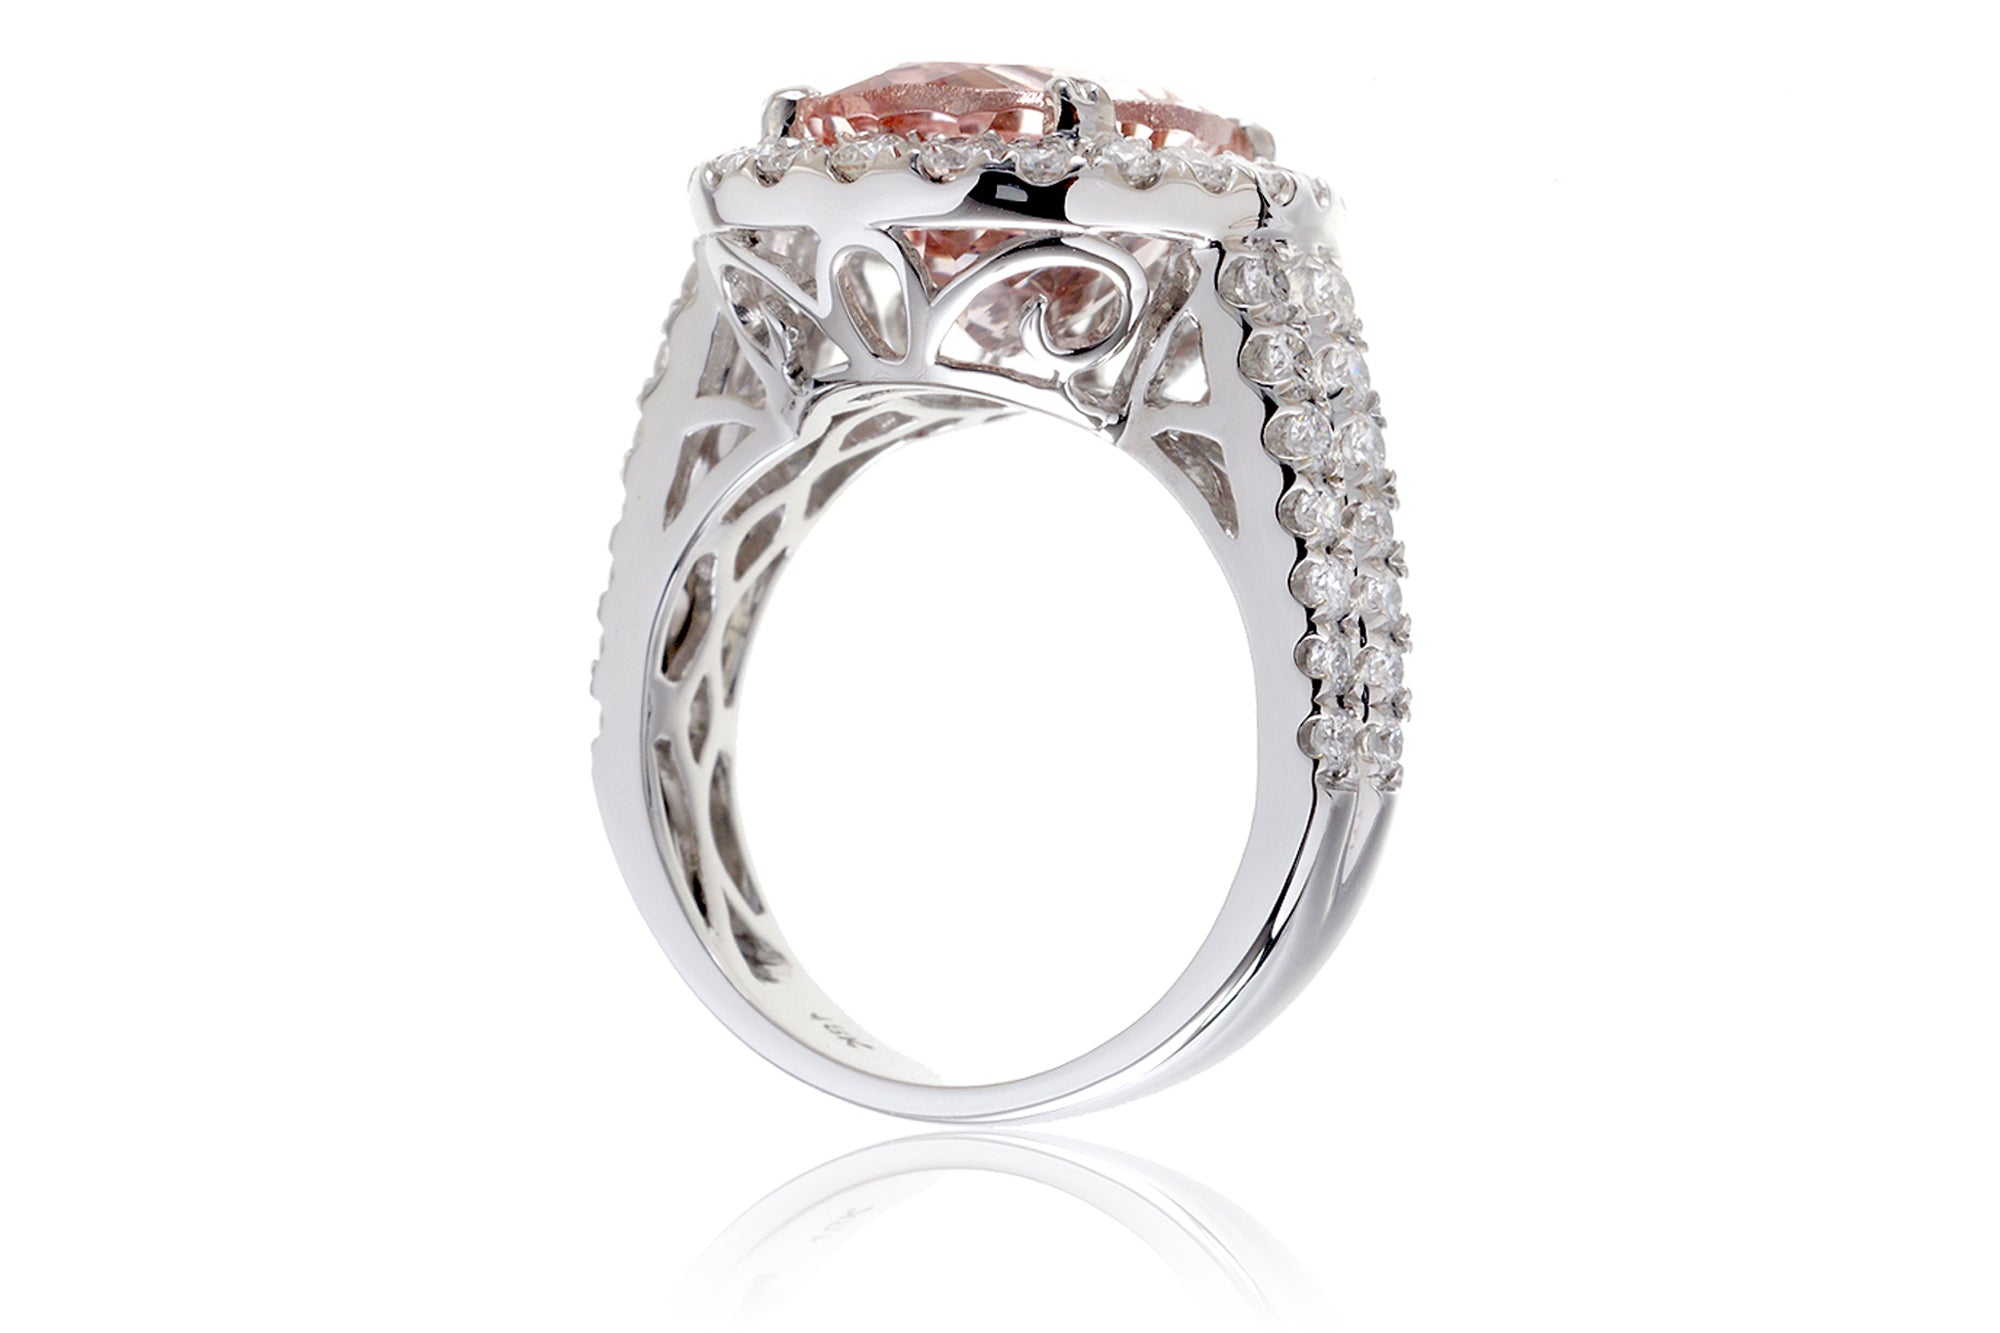 We Are loving these ready-to-ship engagement rings now available on ou